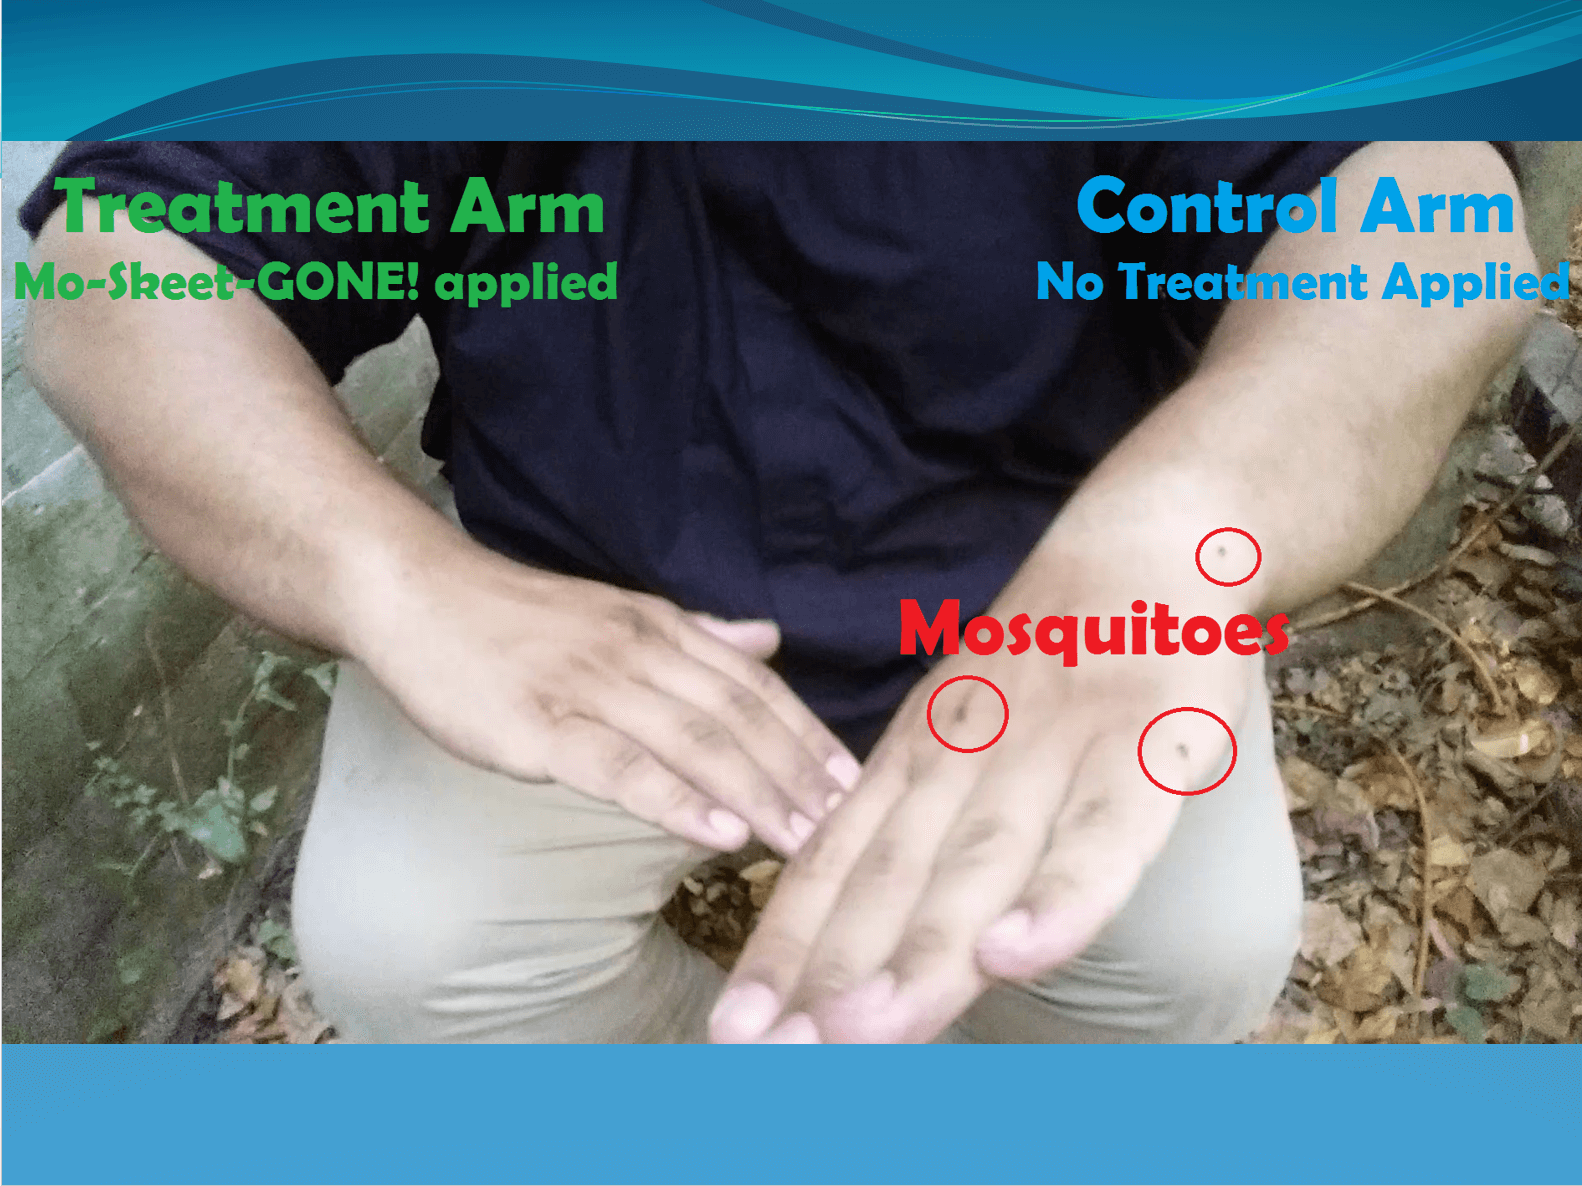 Powerpoint slide from Bilal Qizilbash's innovate ms talk 2016 showcasing him the results of Mo-skeet-gone application on his treatement arm and control arm.